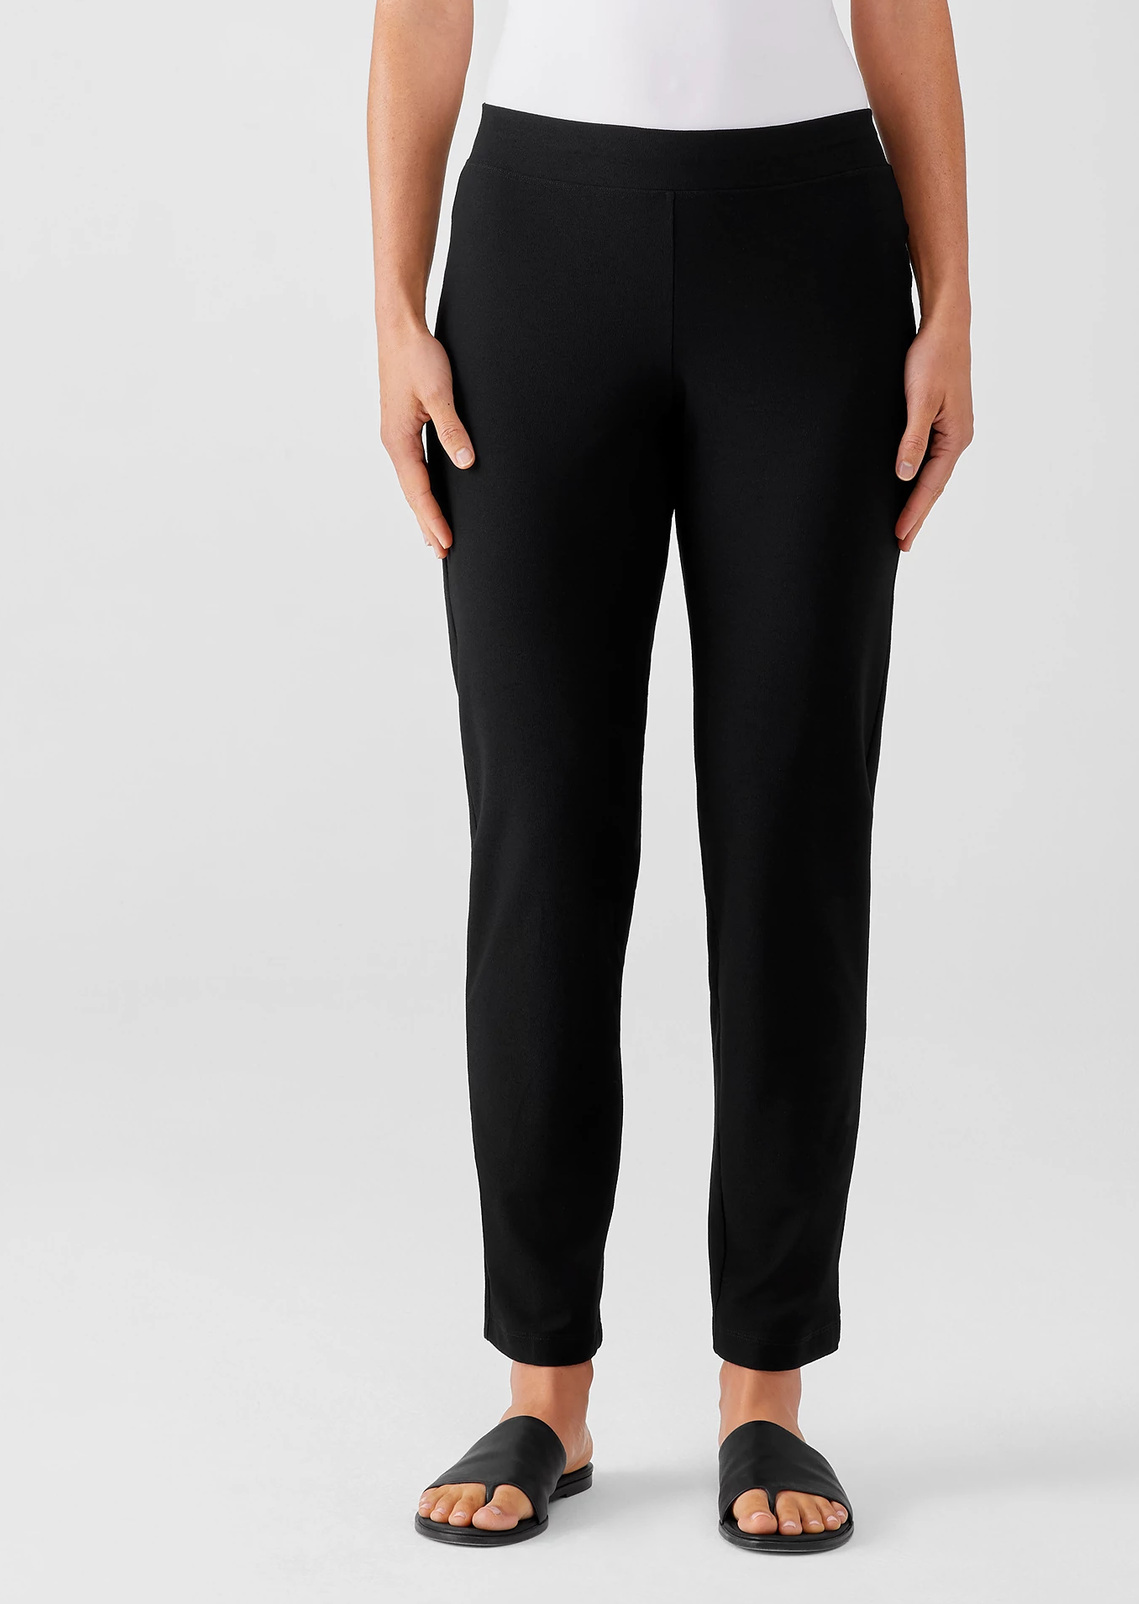 Eileen Fisher Cropped Washable Stretch Crepe Pant